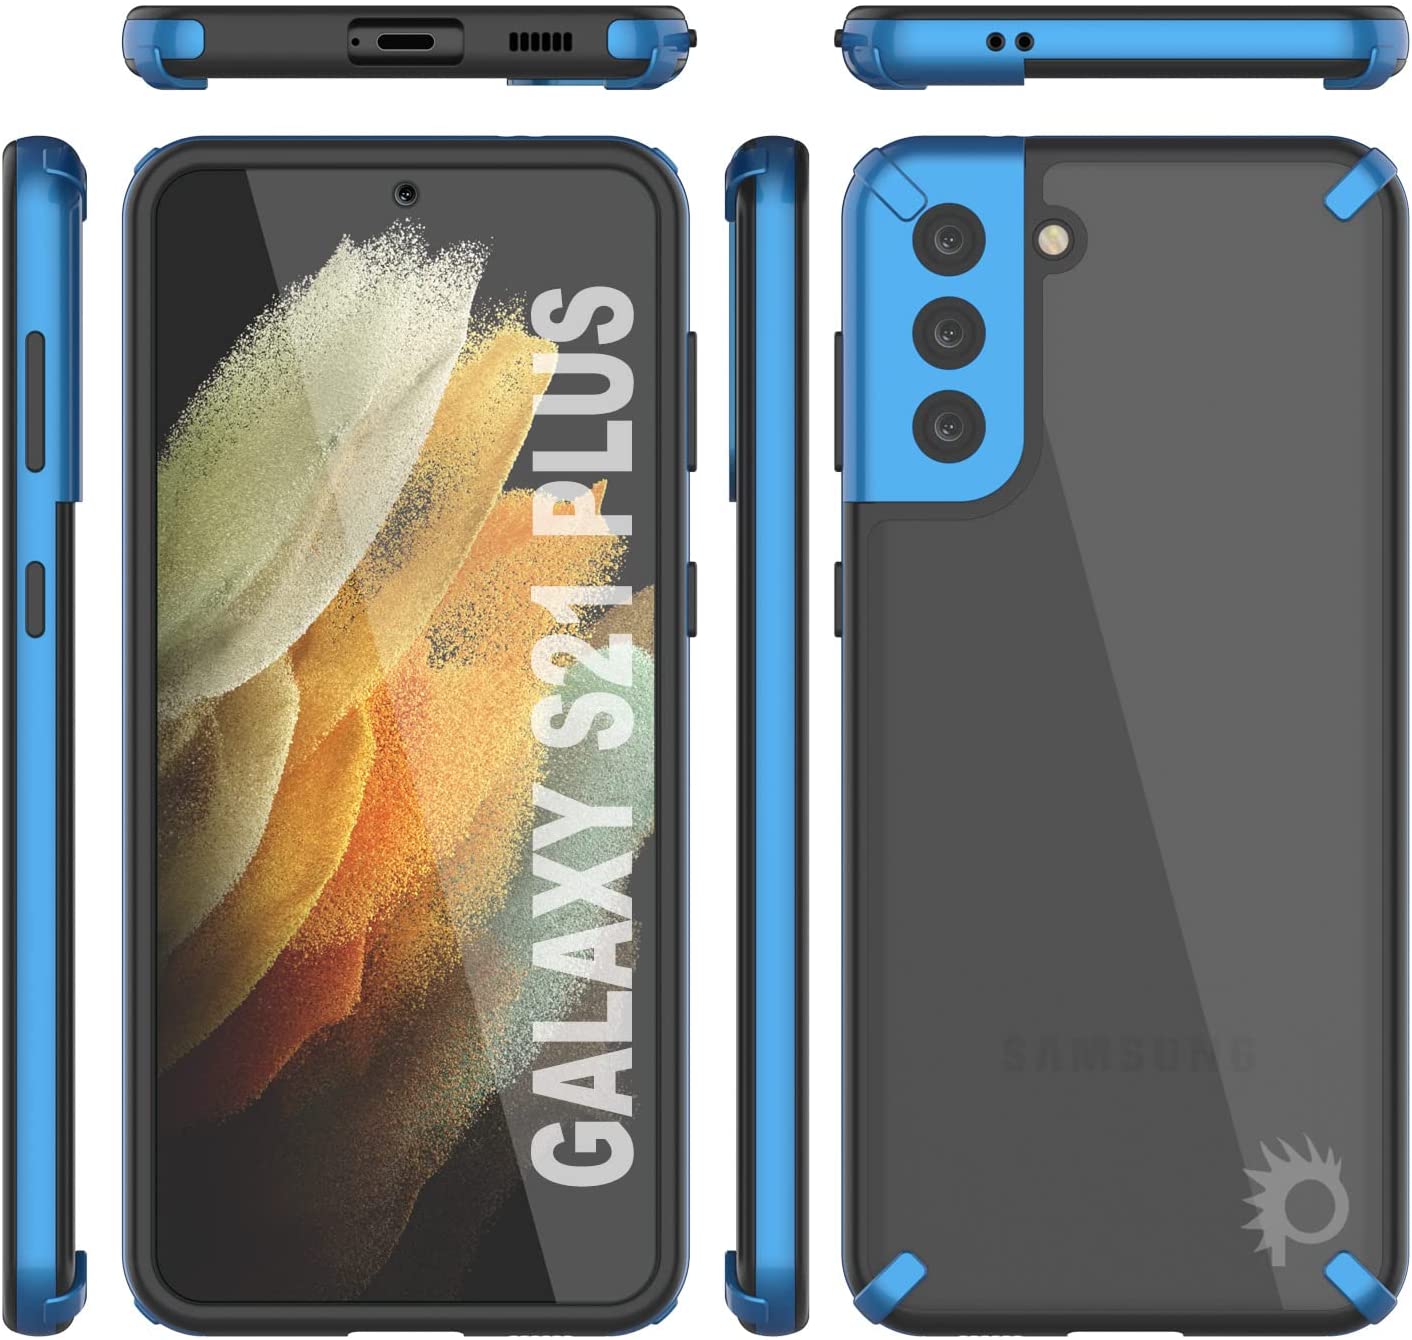 Punkcase Galaxy S21 Plus Case [Mirage Series] Heavy Duty Phone Cover (Blue)